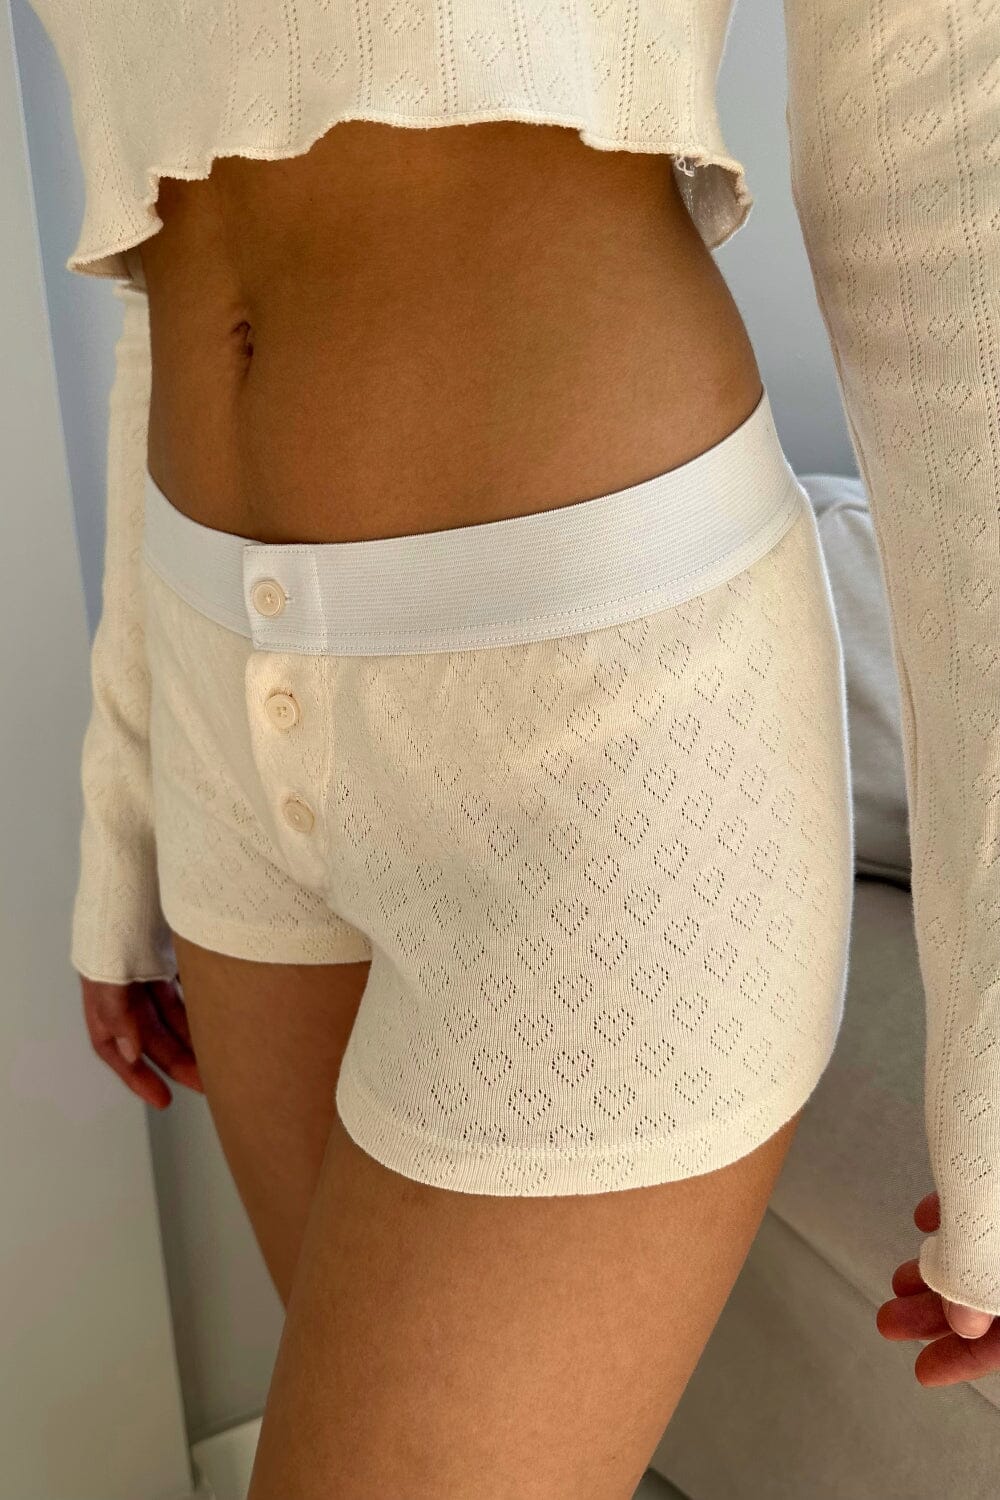 Brandy Melville heart boxers White - $29 - From Talia